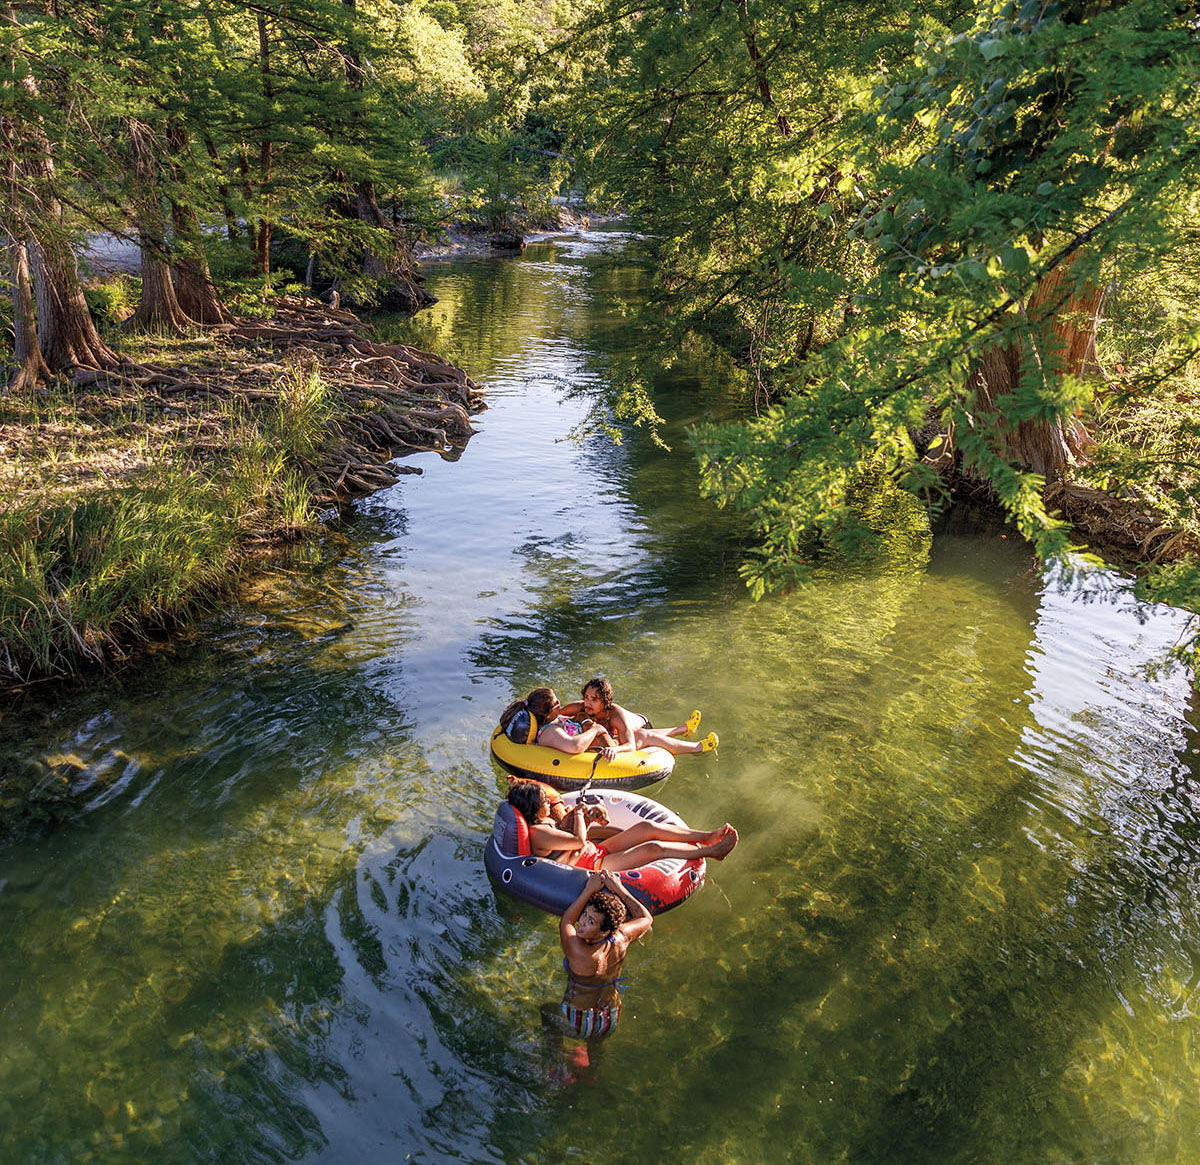 A picture of people tubing in the Medina river under green trees